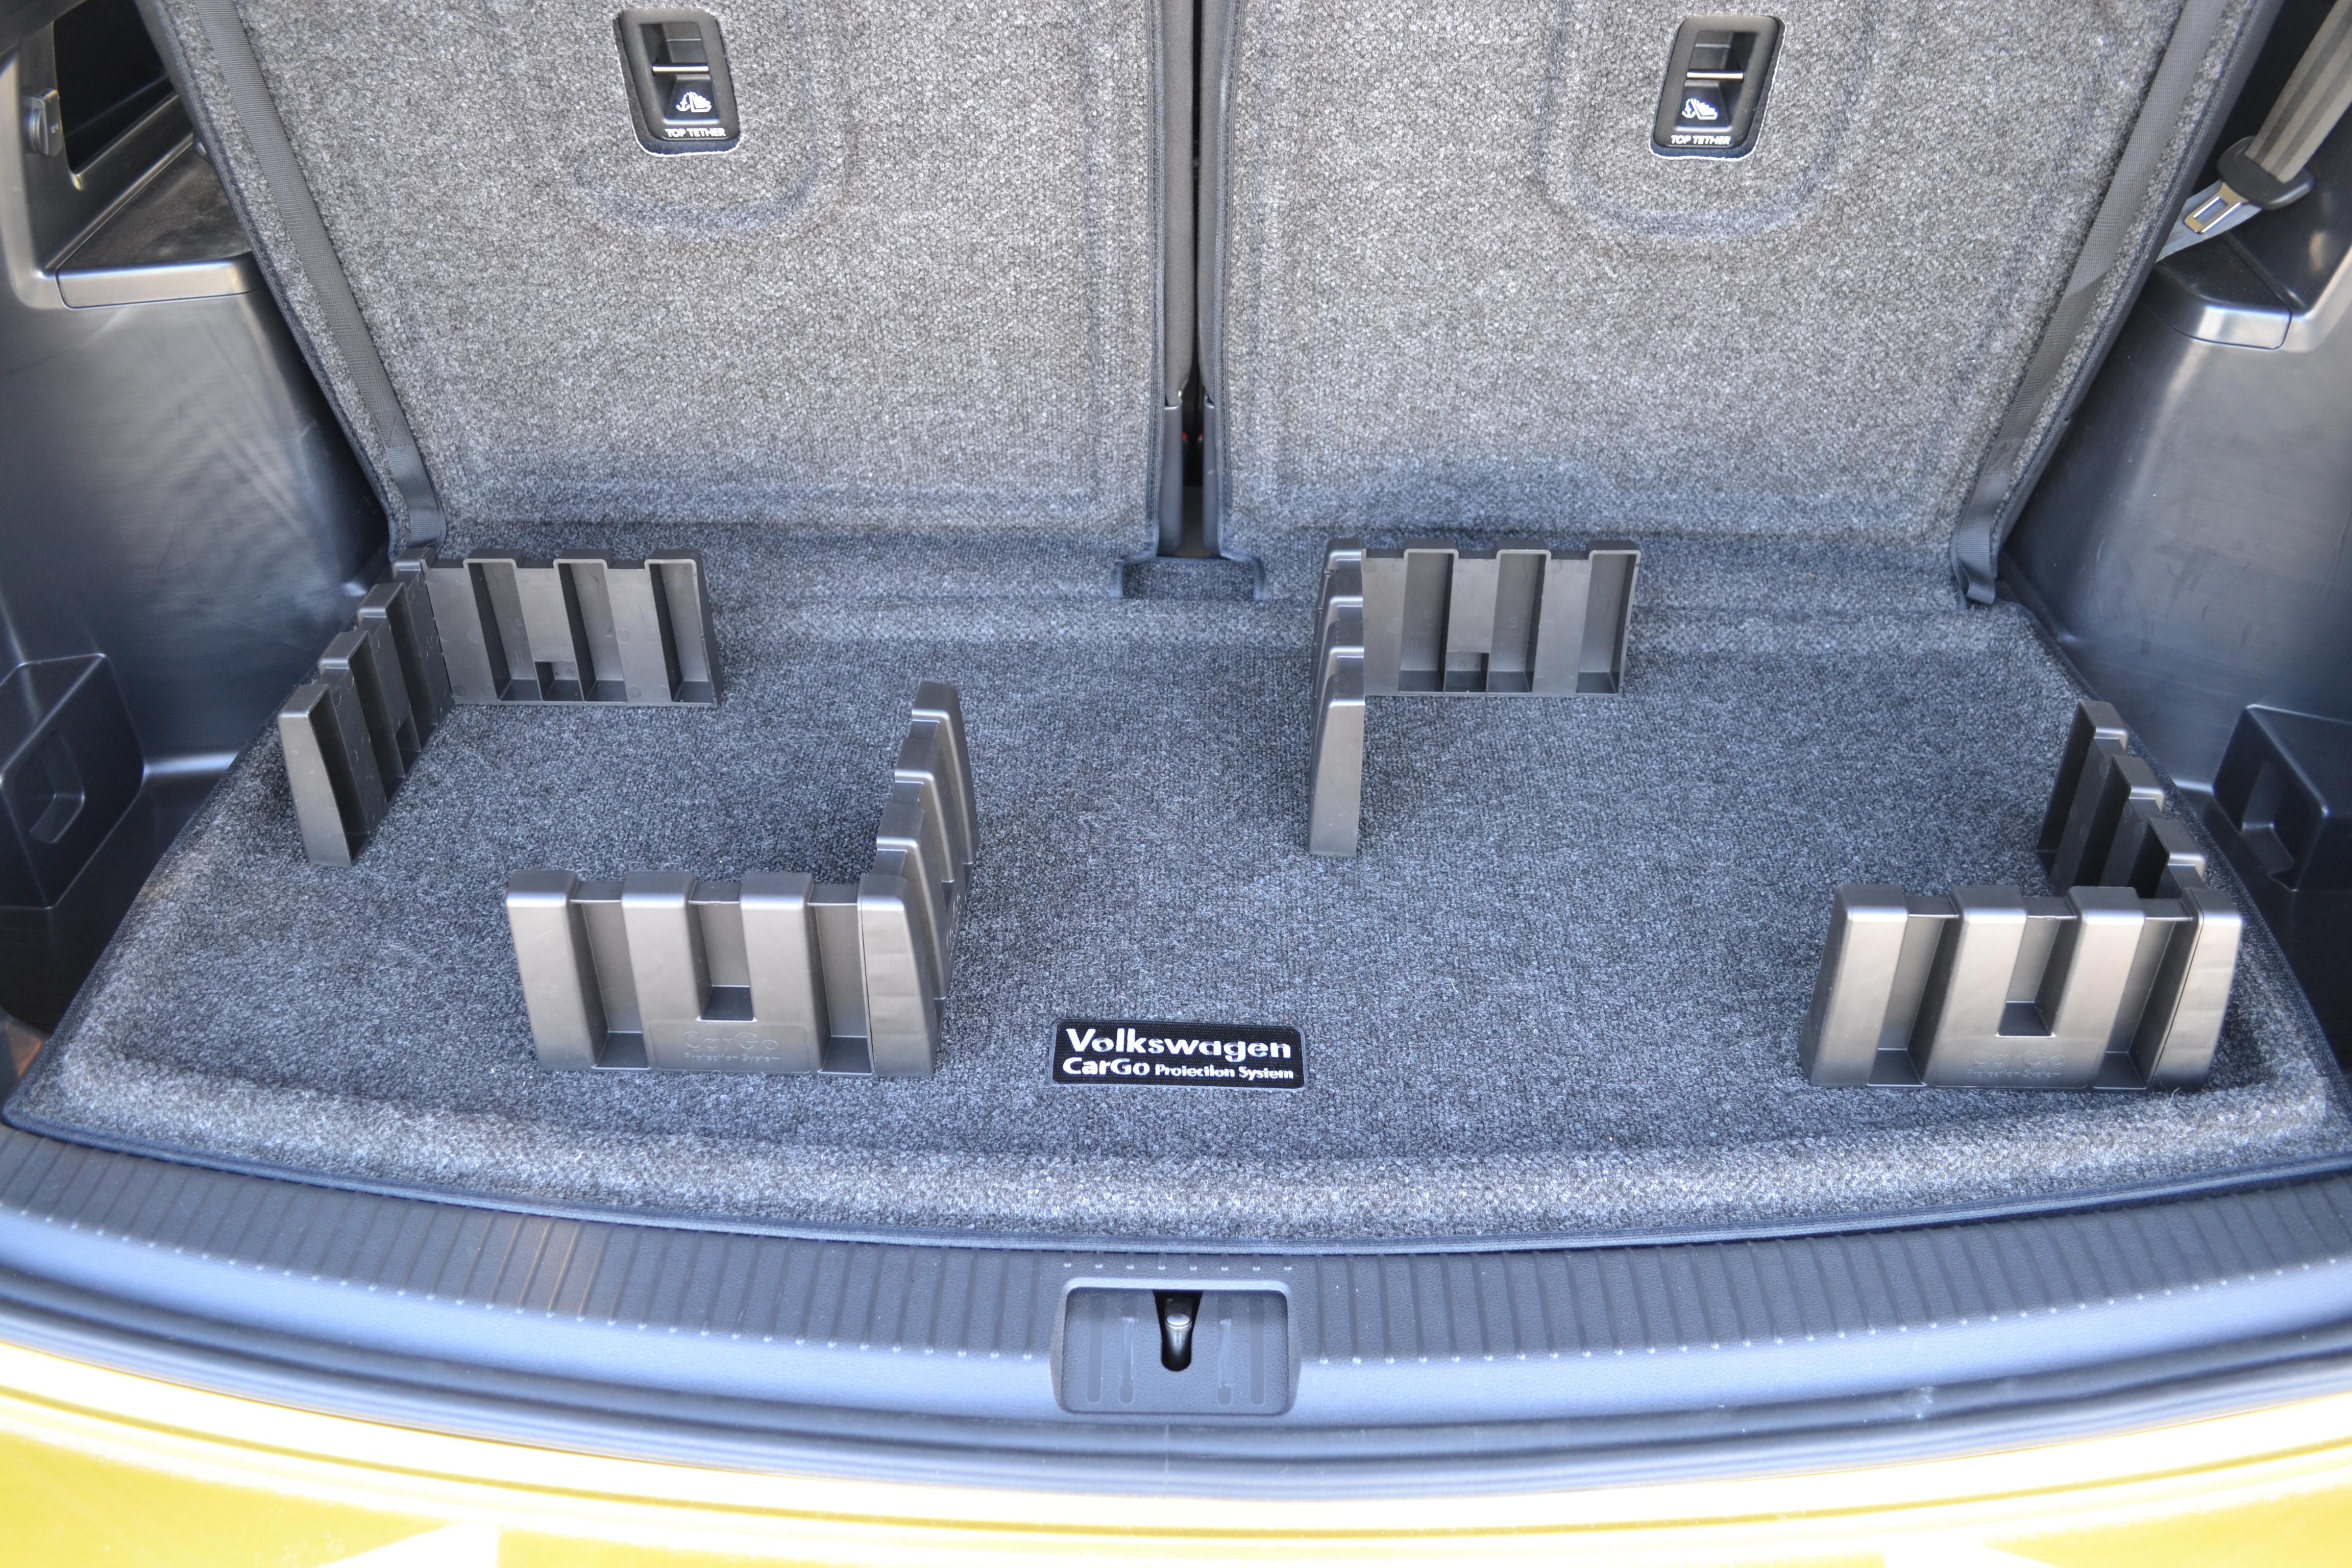 2021 Volkswagen Atlas Heavy Duty Trunk Liner And Extended Seat Back Cover With Cargo Blocks 